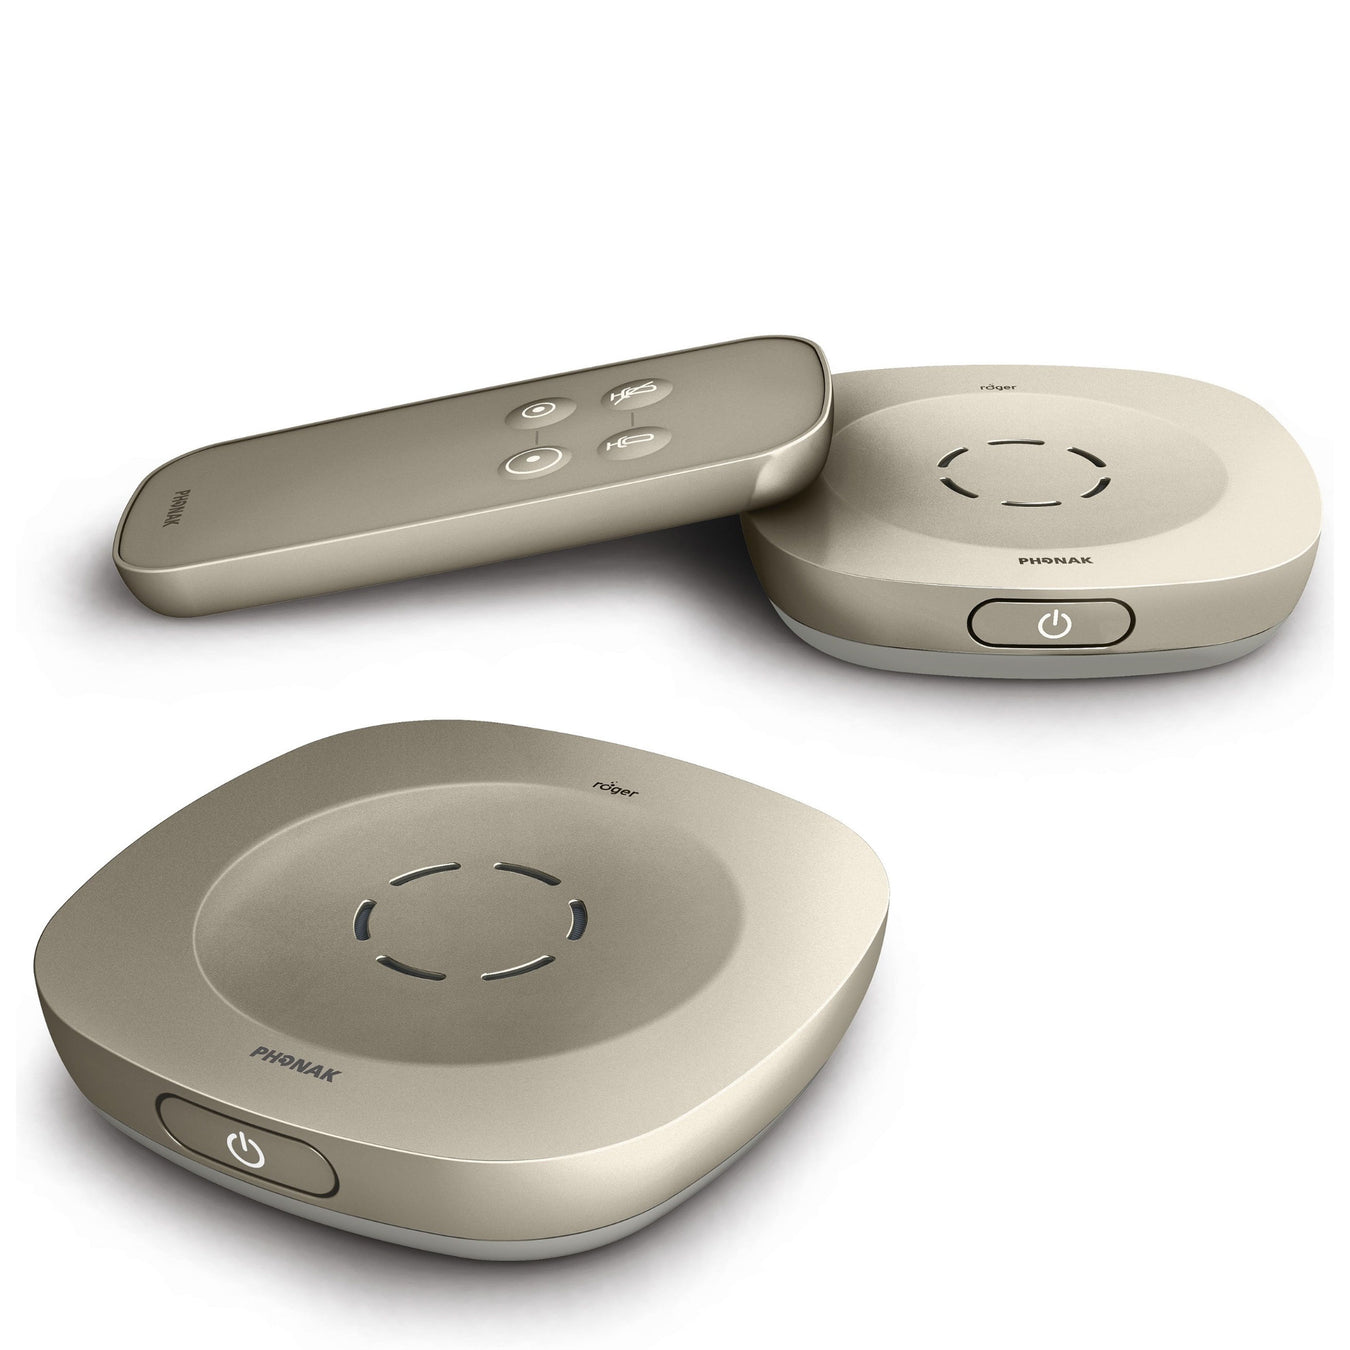 Wireless Phonak Roger microphone for better listening in noise and over distance.  Compatible with most hearing aid and cochlear implant brands.  Great for work meetings, conversations, and listening to audio devices. Table microphone with remote control.